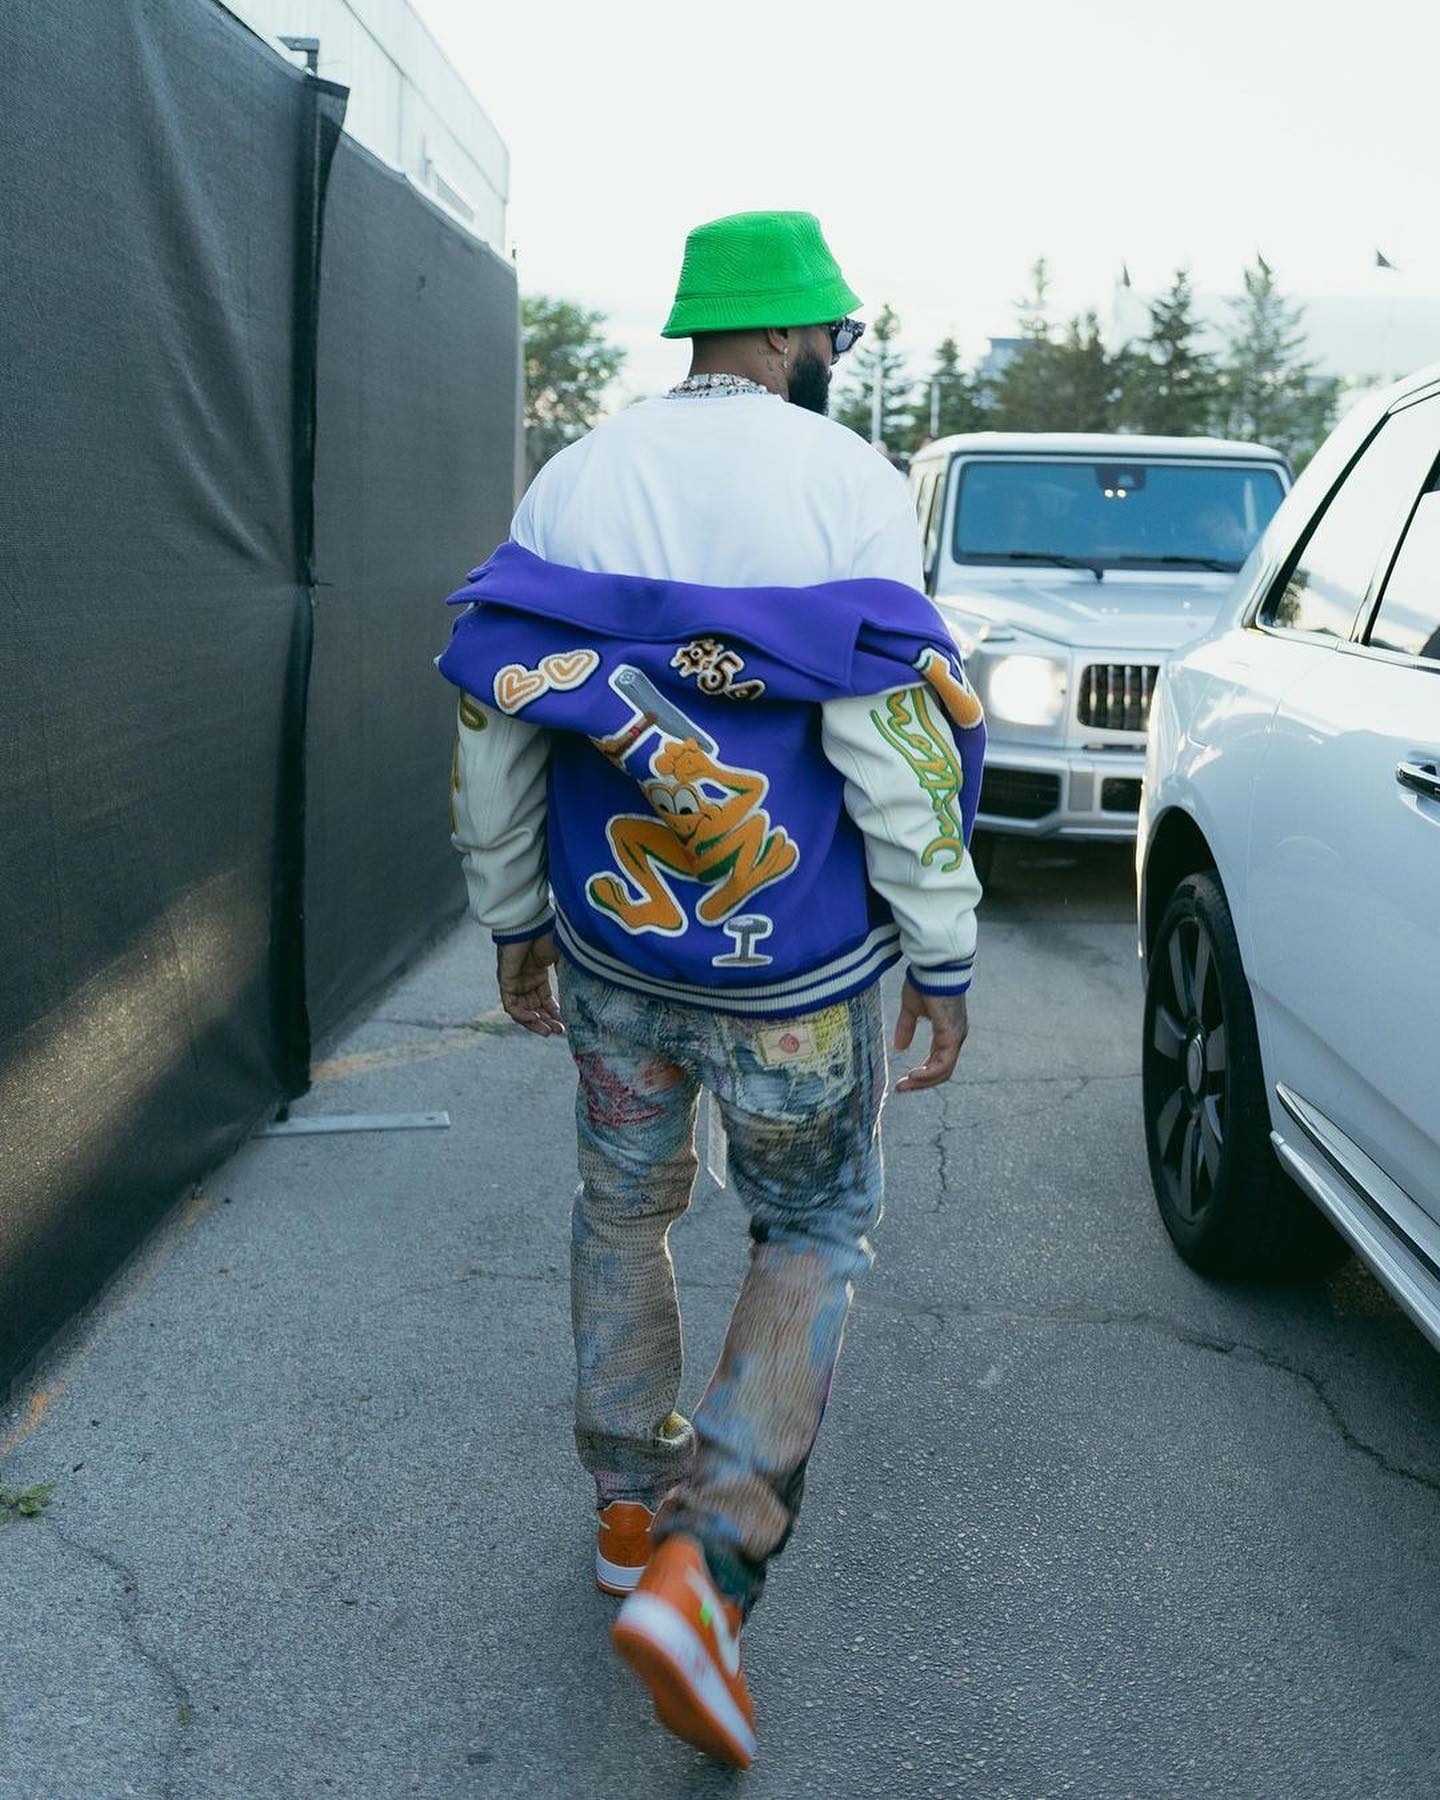 Celebs Love: Odell Beckham Jr., Luka Sabbat, Vic Mensa and Money Man All  Wore Louis Vuitton's Blue and Neon Green Gradient Varsity Bomber Jacket –  Fashion Bomb Daily